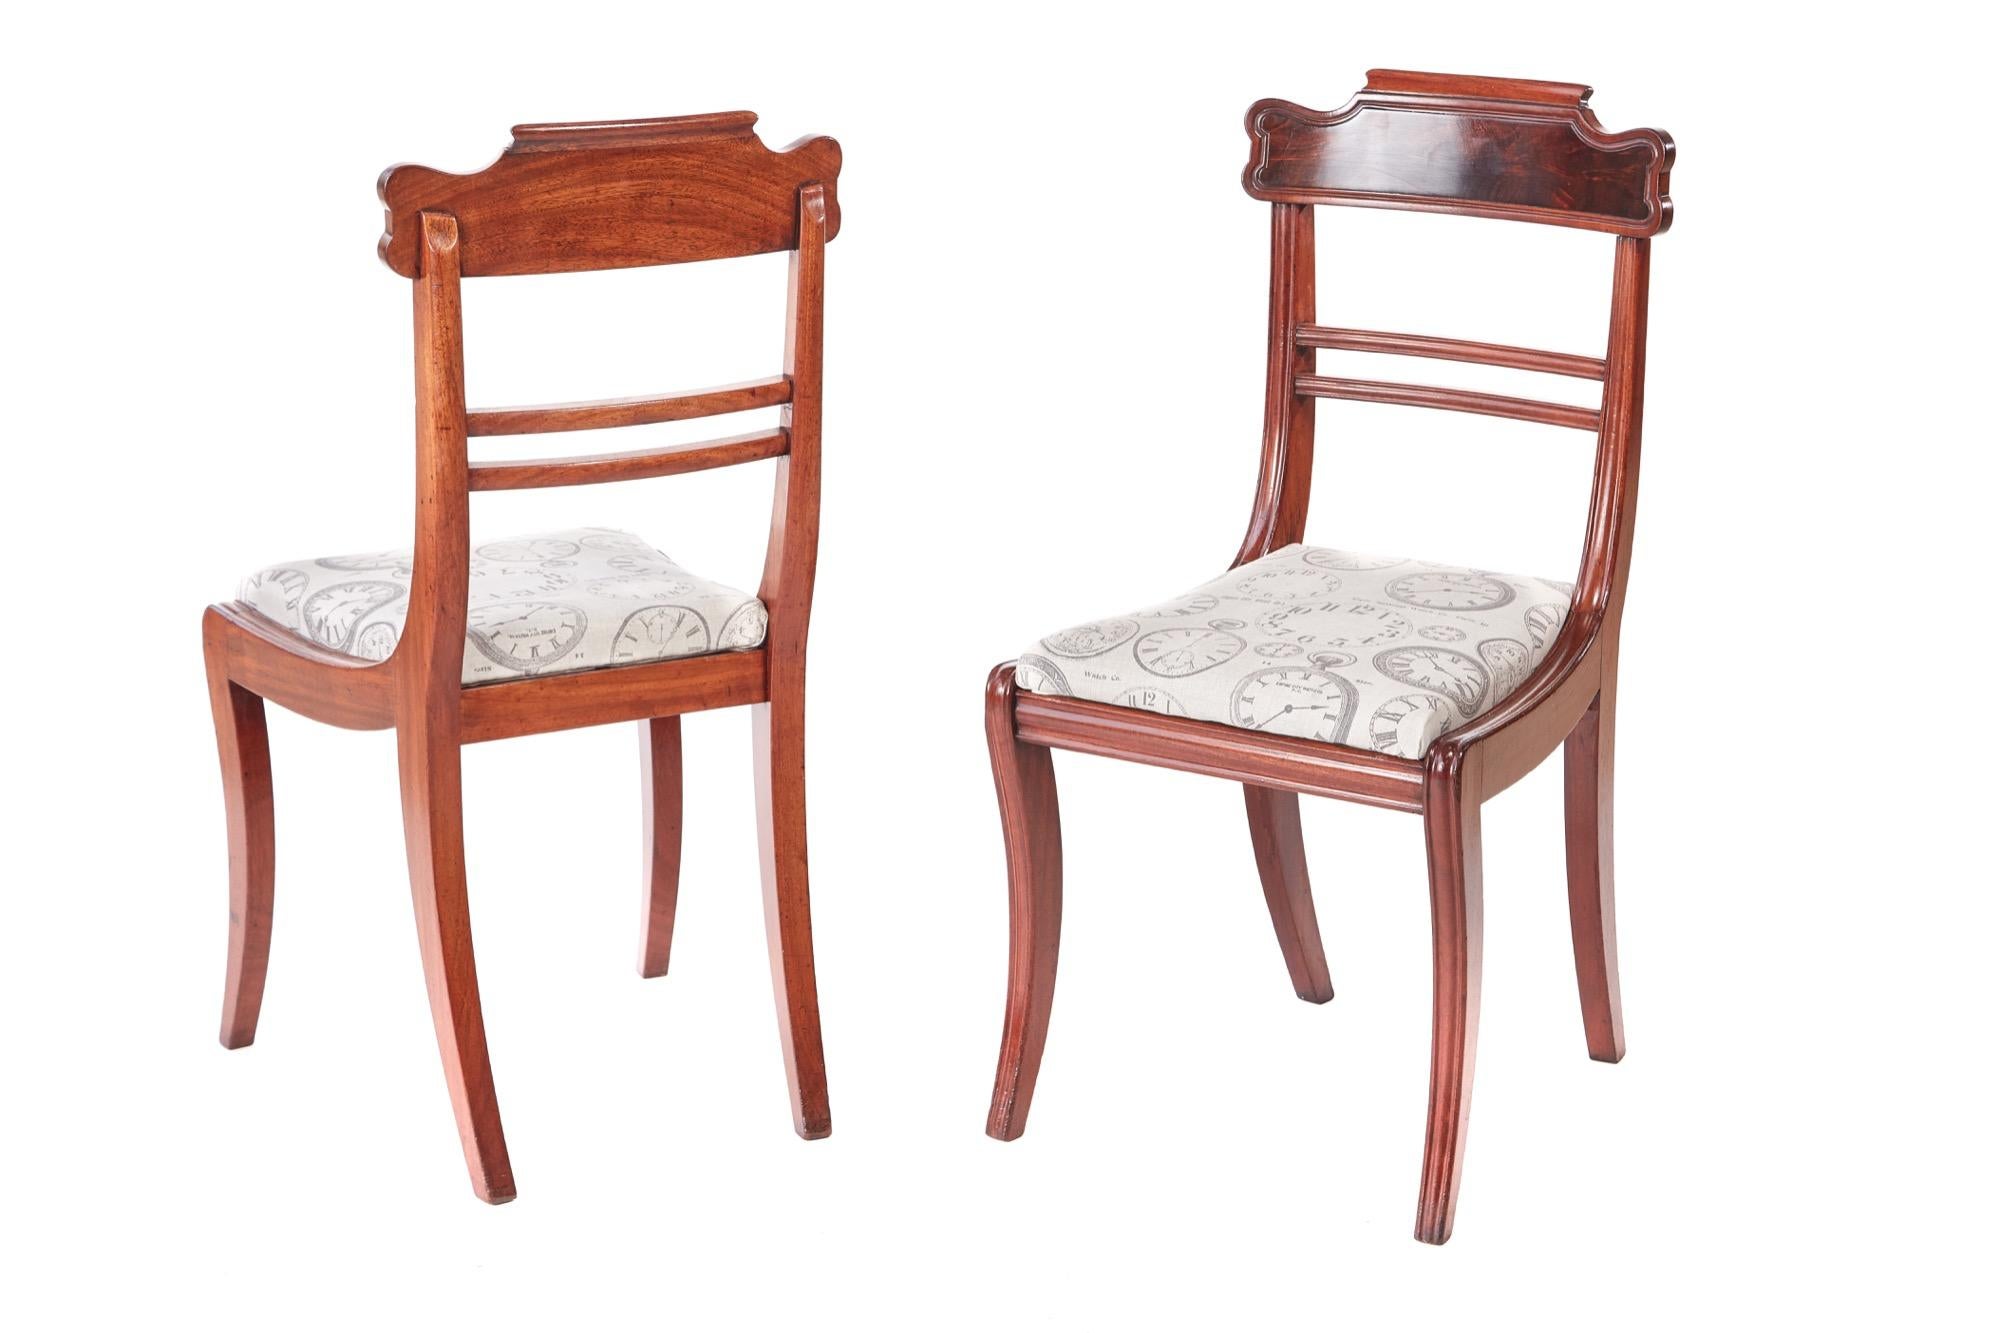 Quality set of four regency mahogany dining chairs,having a shaped flame mahogany top rail with a reeded edge,reeded centre rails,newly re-upholstered drop in seats,standing on reeded sabre legs to the front outswept back legs
Lovely colour and